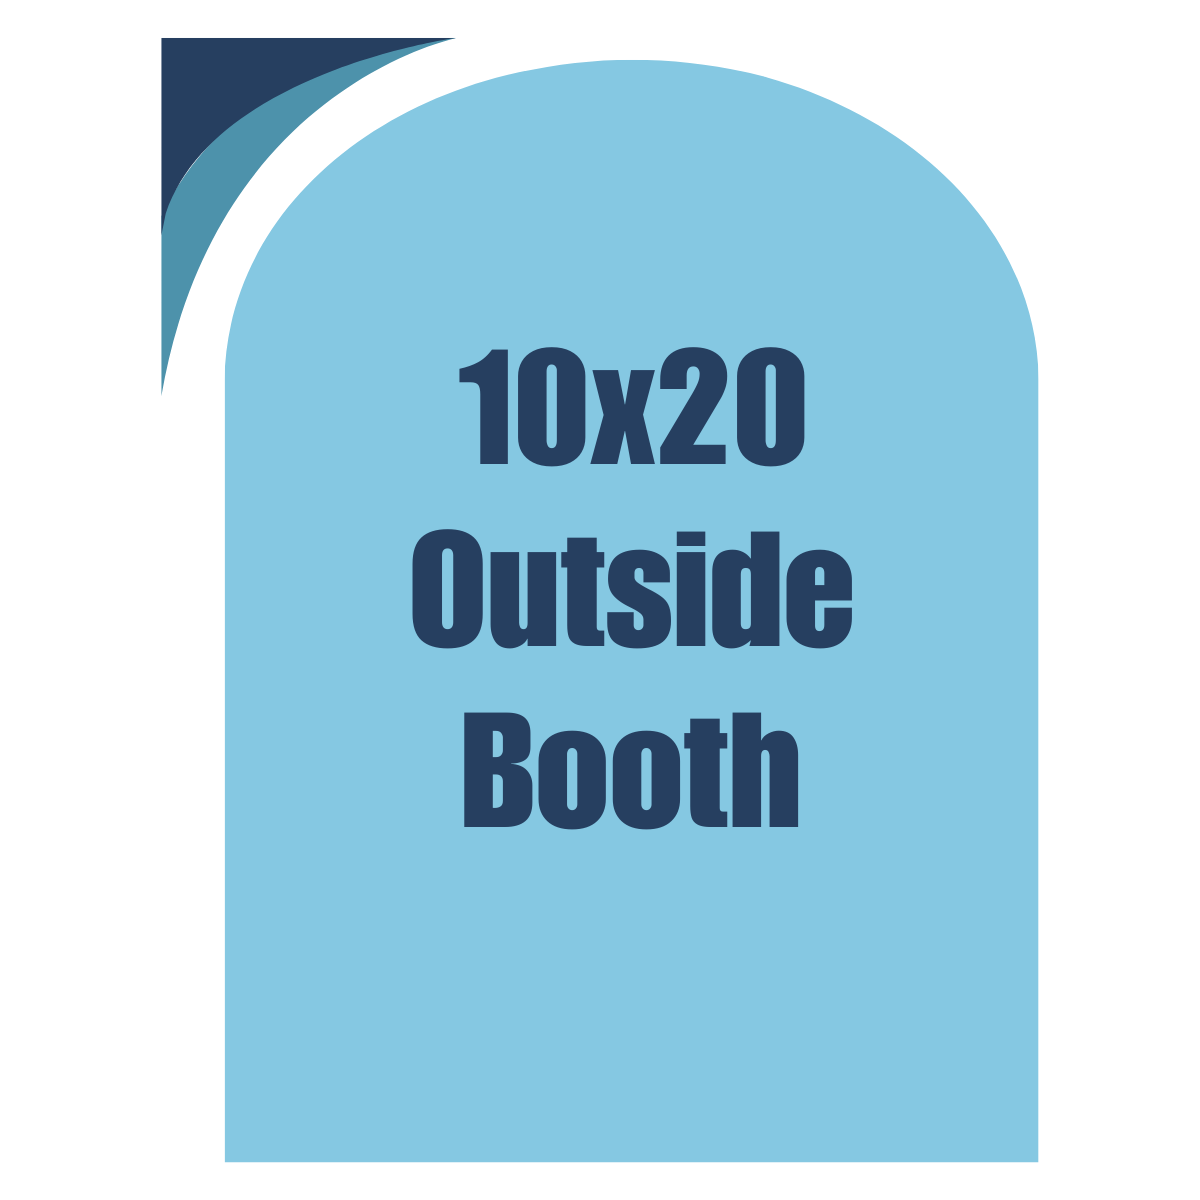 10x20 Outside Booth